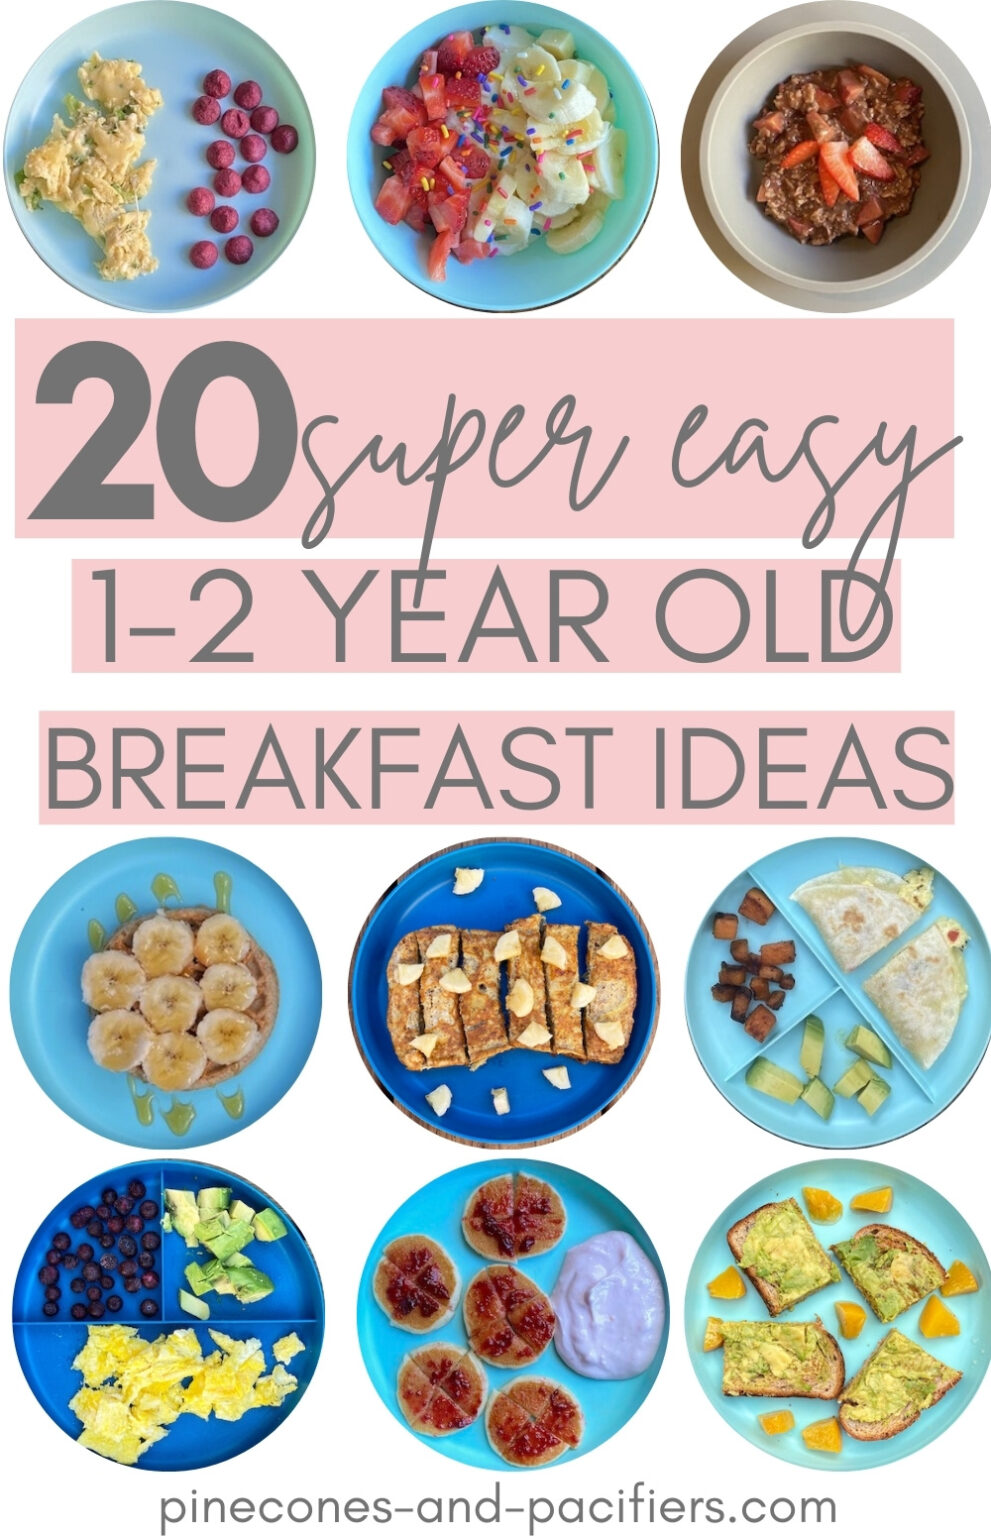 20 Breakfast Ideas for 1-2 Year Olds - Pinecones & Pacifiers